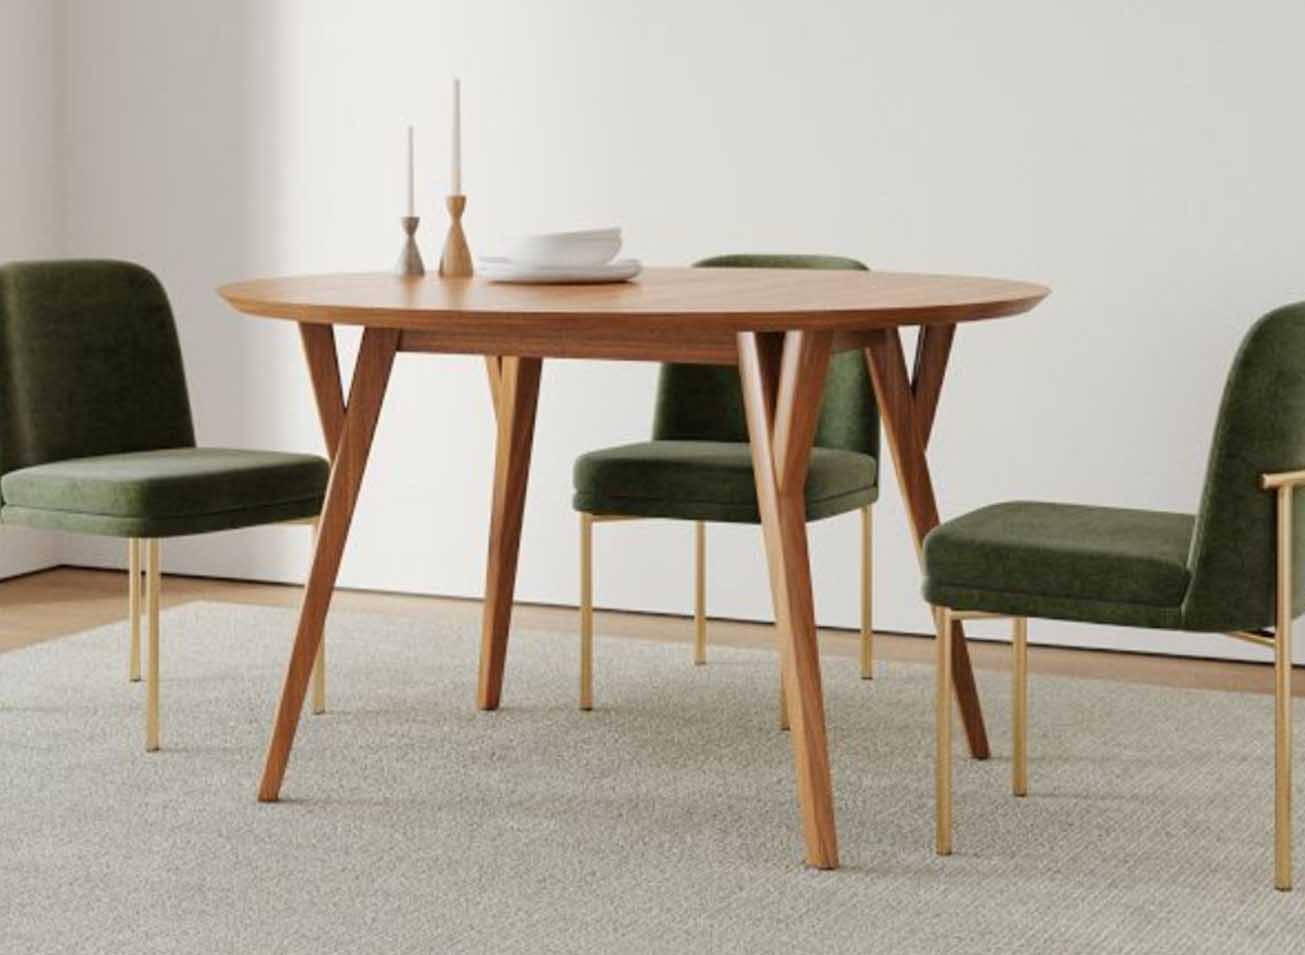 Versatile Dining Solutions: Expandable Dining Tables, Perfect for Small Apartments!